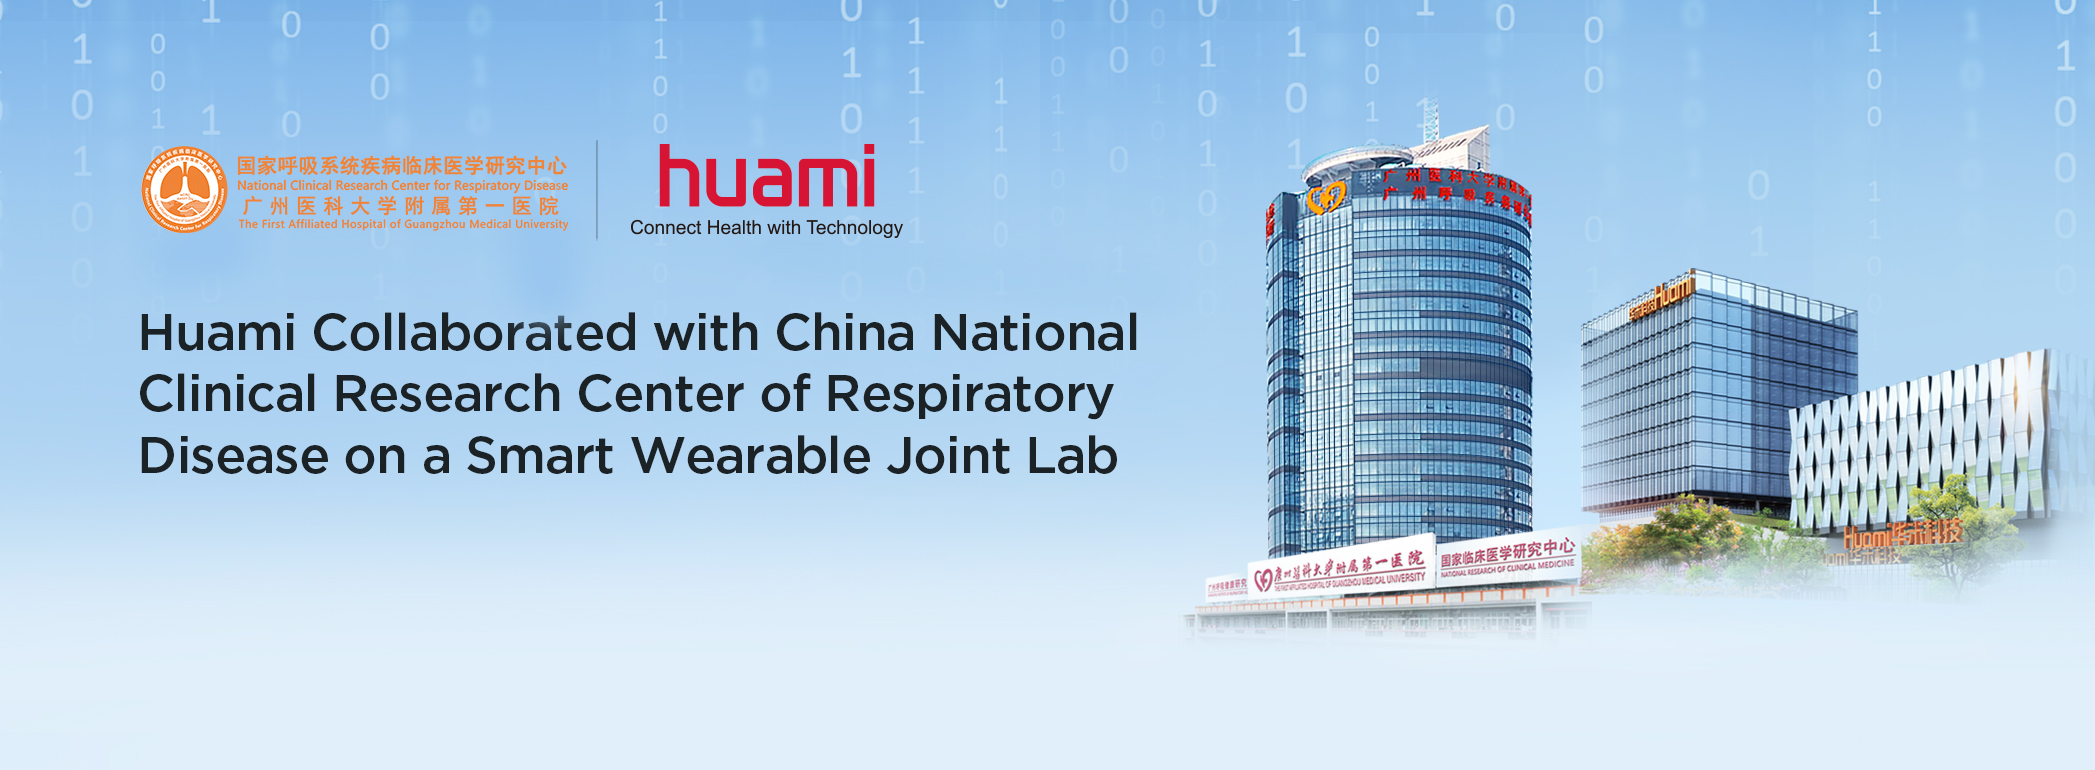 Huami Partnered with Nanshan Zhong's Team to Combat COVID-19 Coronavirus on a Joint Lab